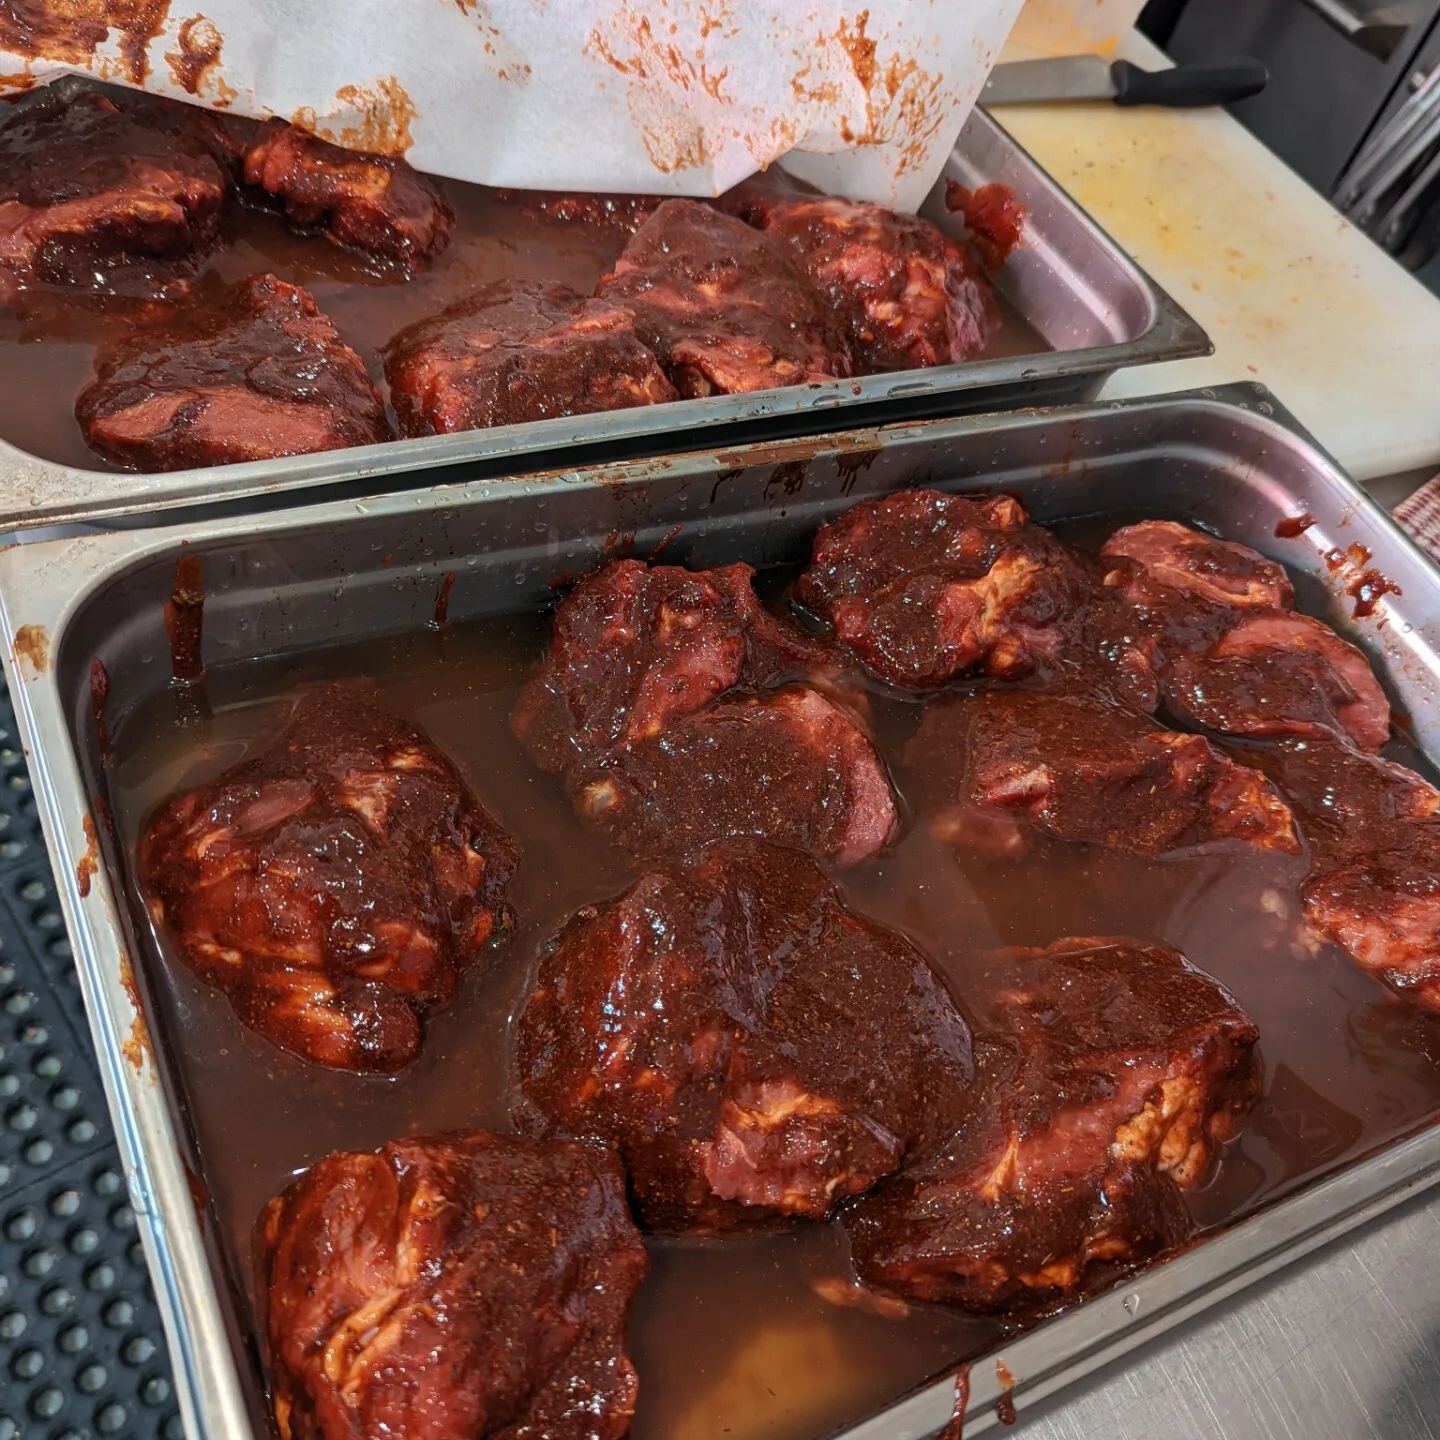 Here's a little word-up on what goes into our Cuban pulled pork which we use in our Cuban toastie and Eggs Bennie...first we use pork shoulder which is marinated for 48 hours in our special Cuban marinade sauce. 

We then slow-cook it in our oven for